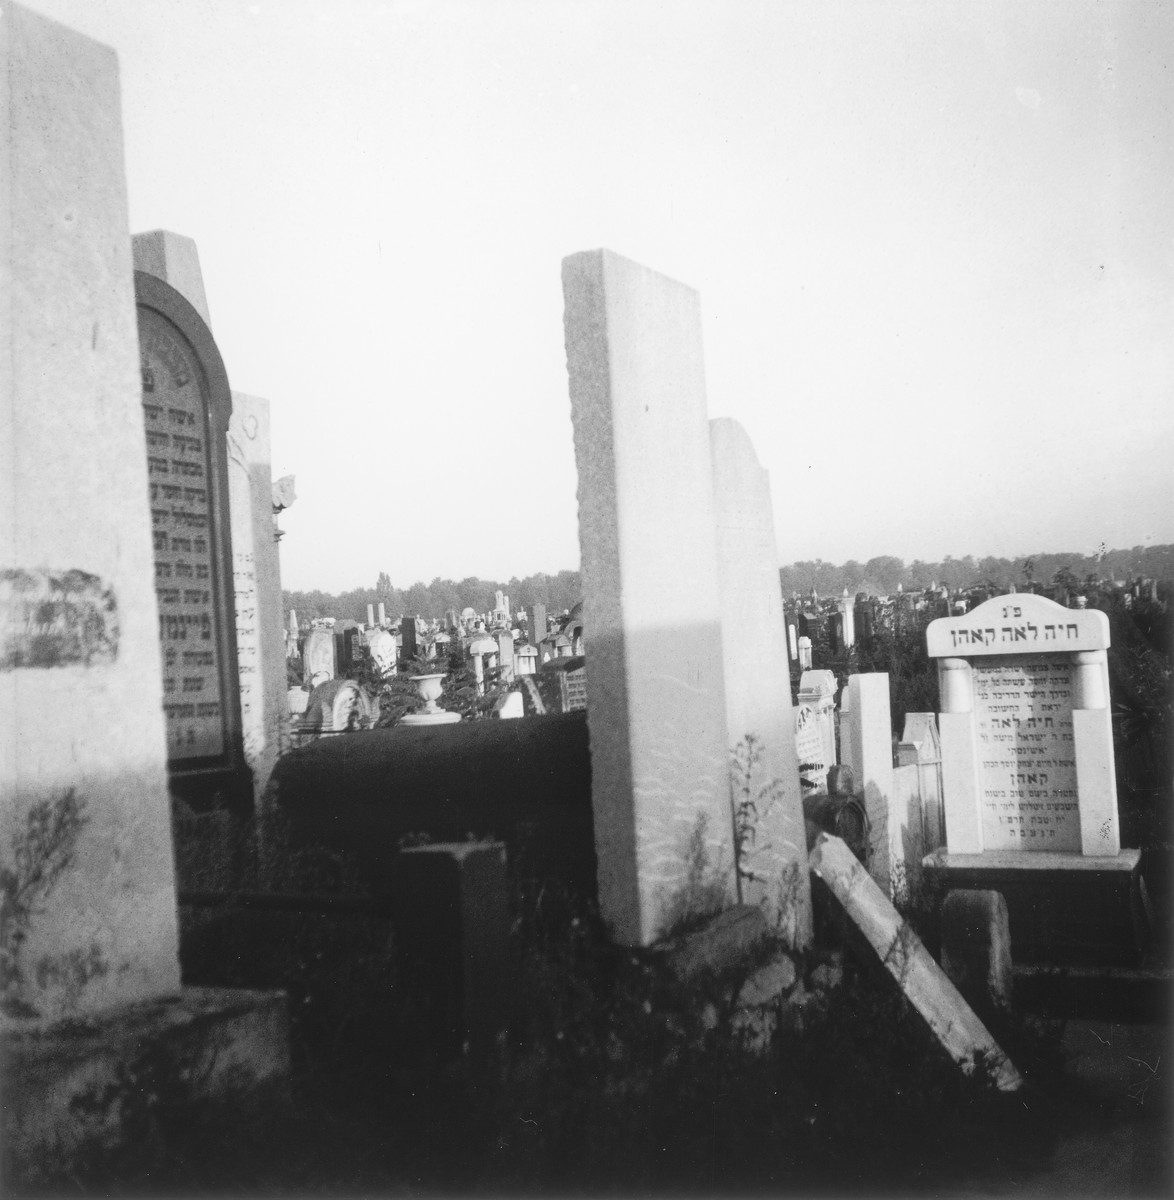 The Jewish cemetery in the Warsaw ghetto.

Joest's original caption reads: "From here one could gaze all the way to the horizon across a vast field of tombstones."